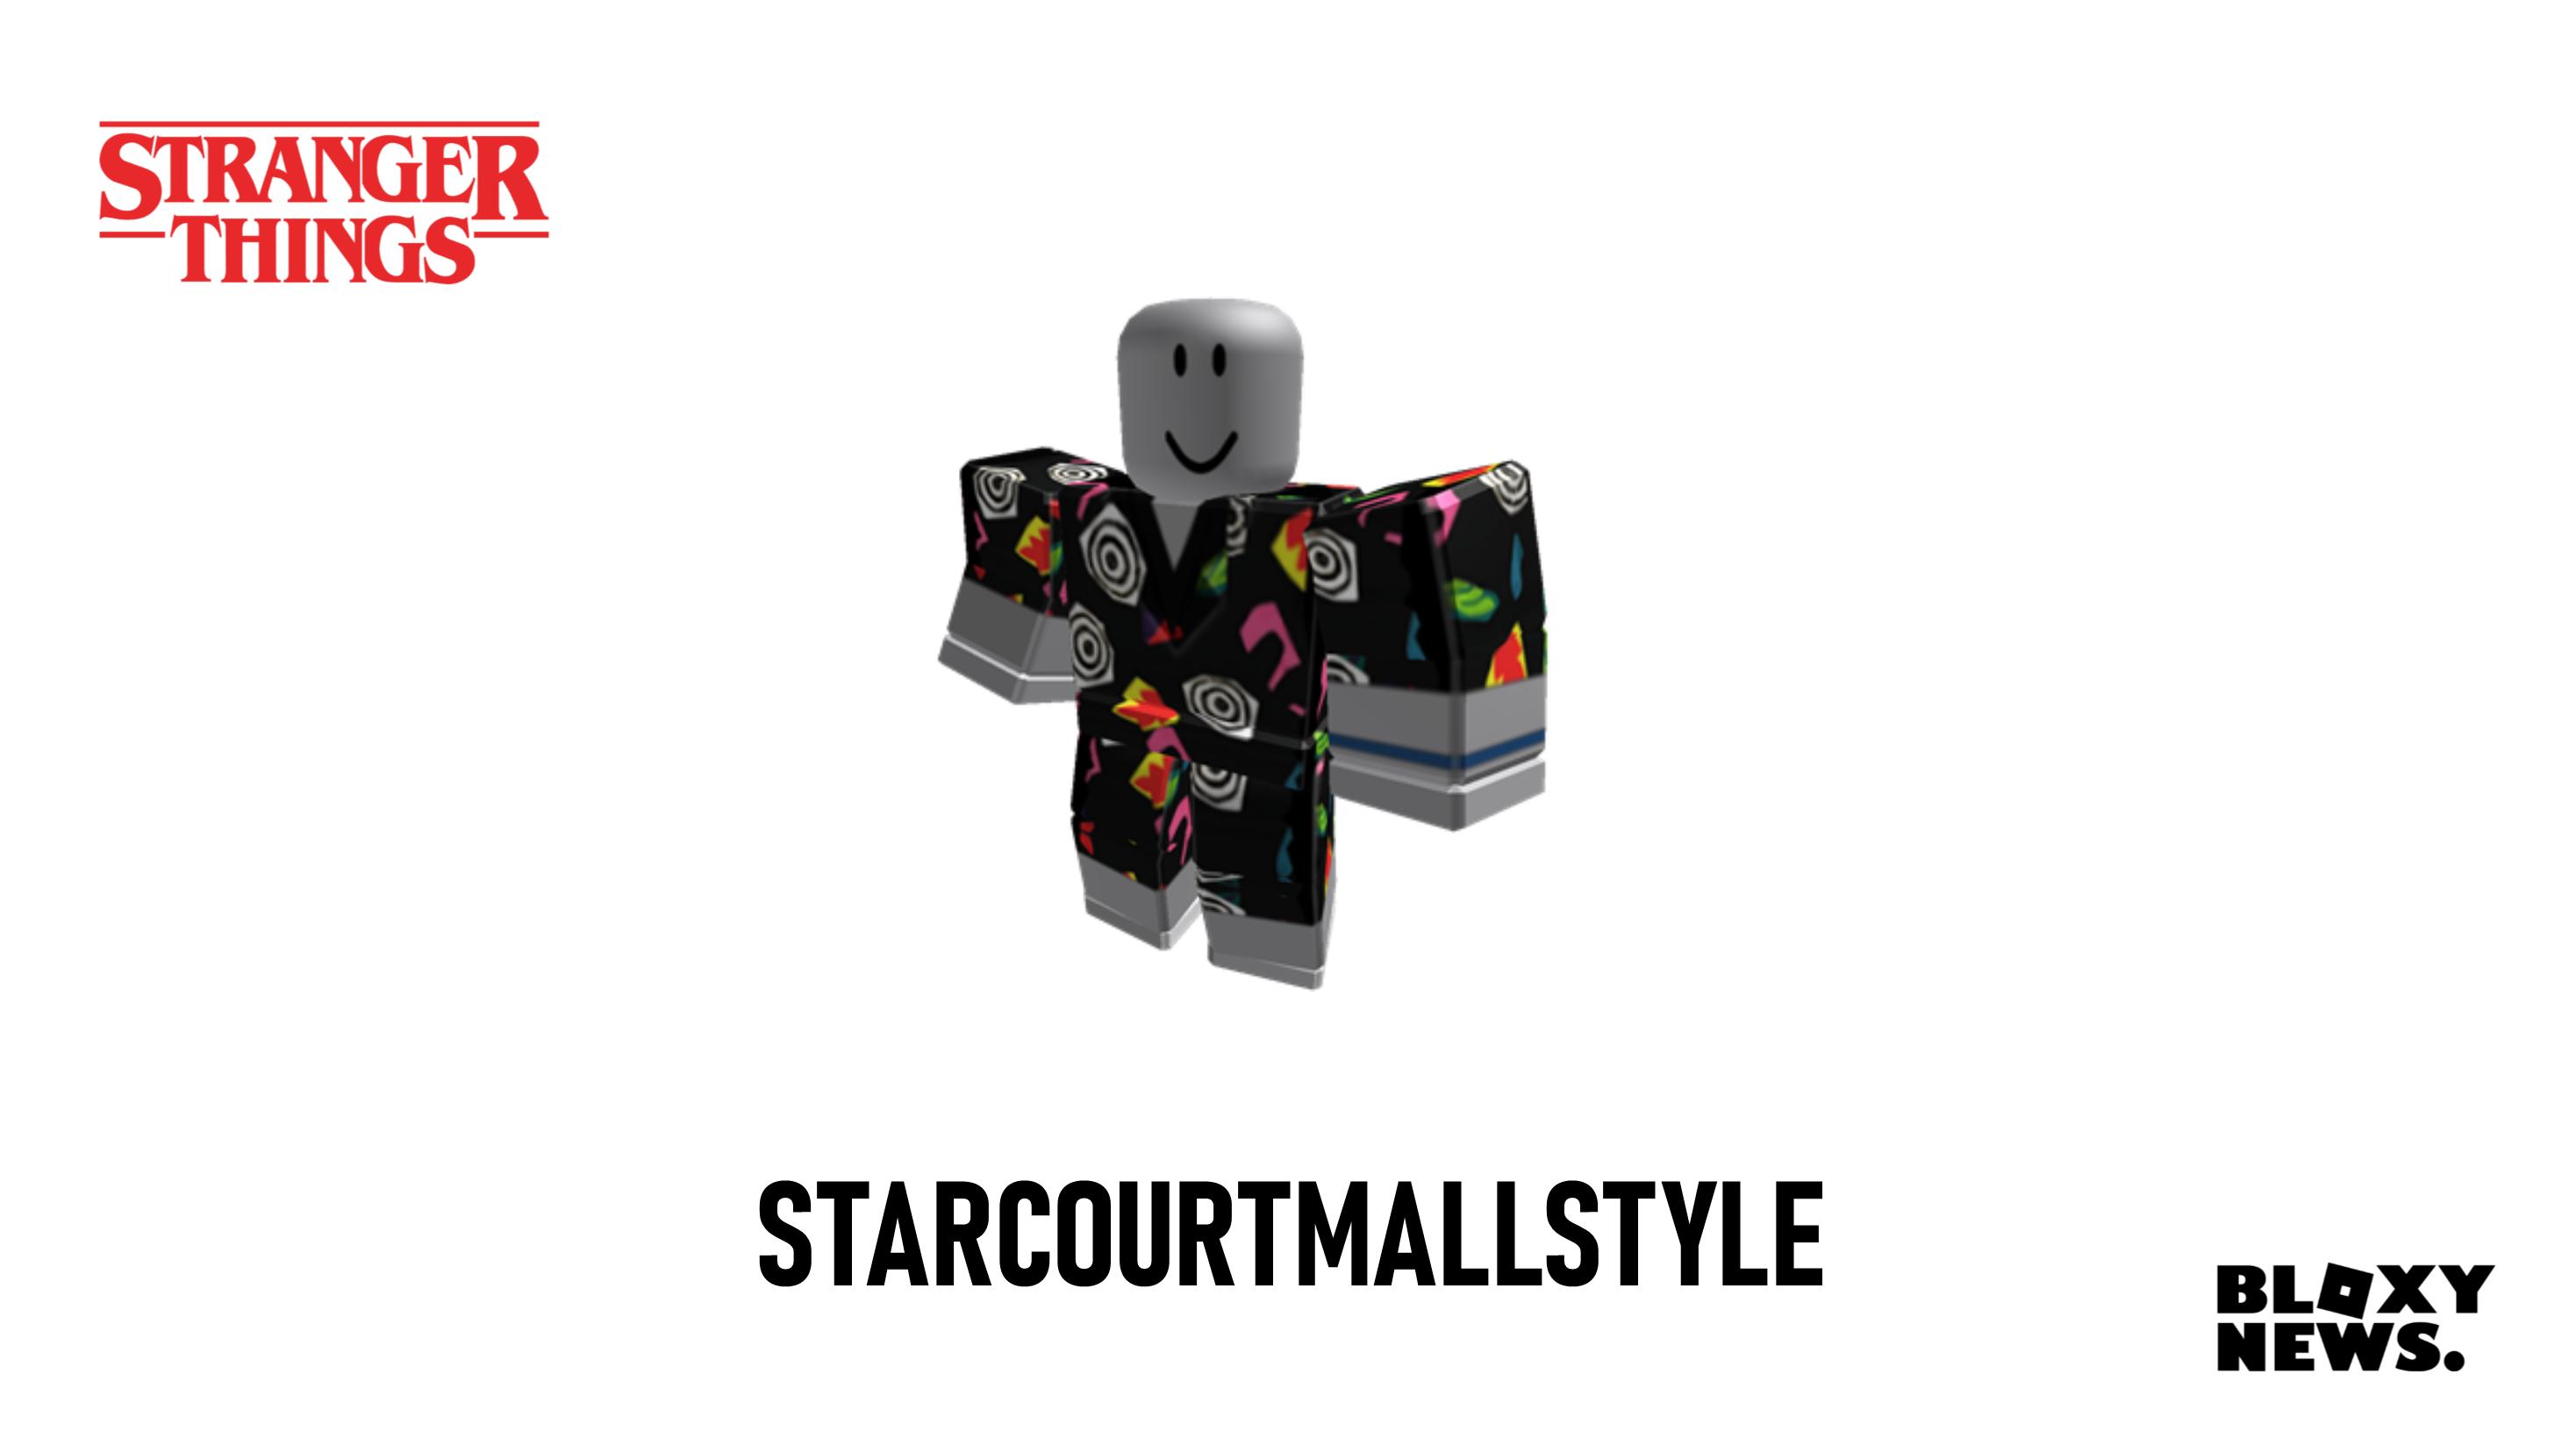 News on Twitter: "#BloxyNews | It's day #2 of the #Roblox Event the second Promocode has been Head to https://t.co/7qVdjgeJBm and enter the code 'STARCOURTMALLSTYLE' to receive Eleven's